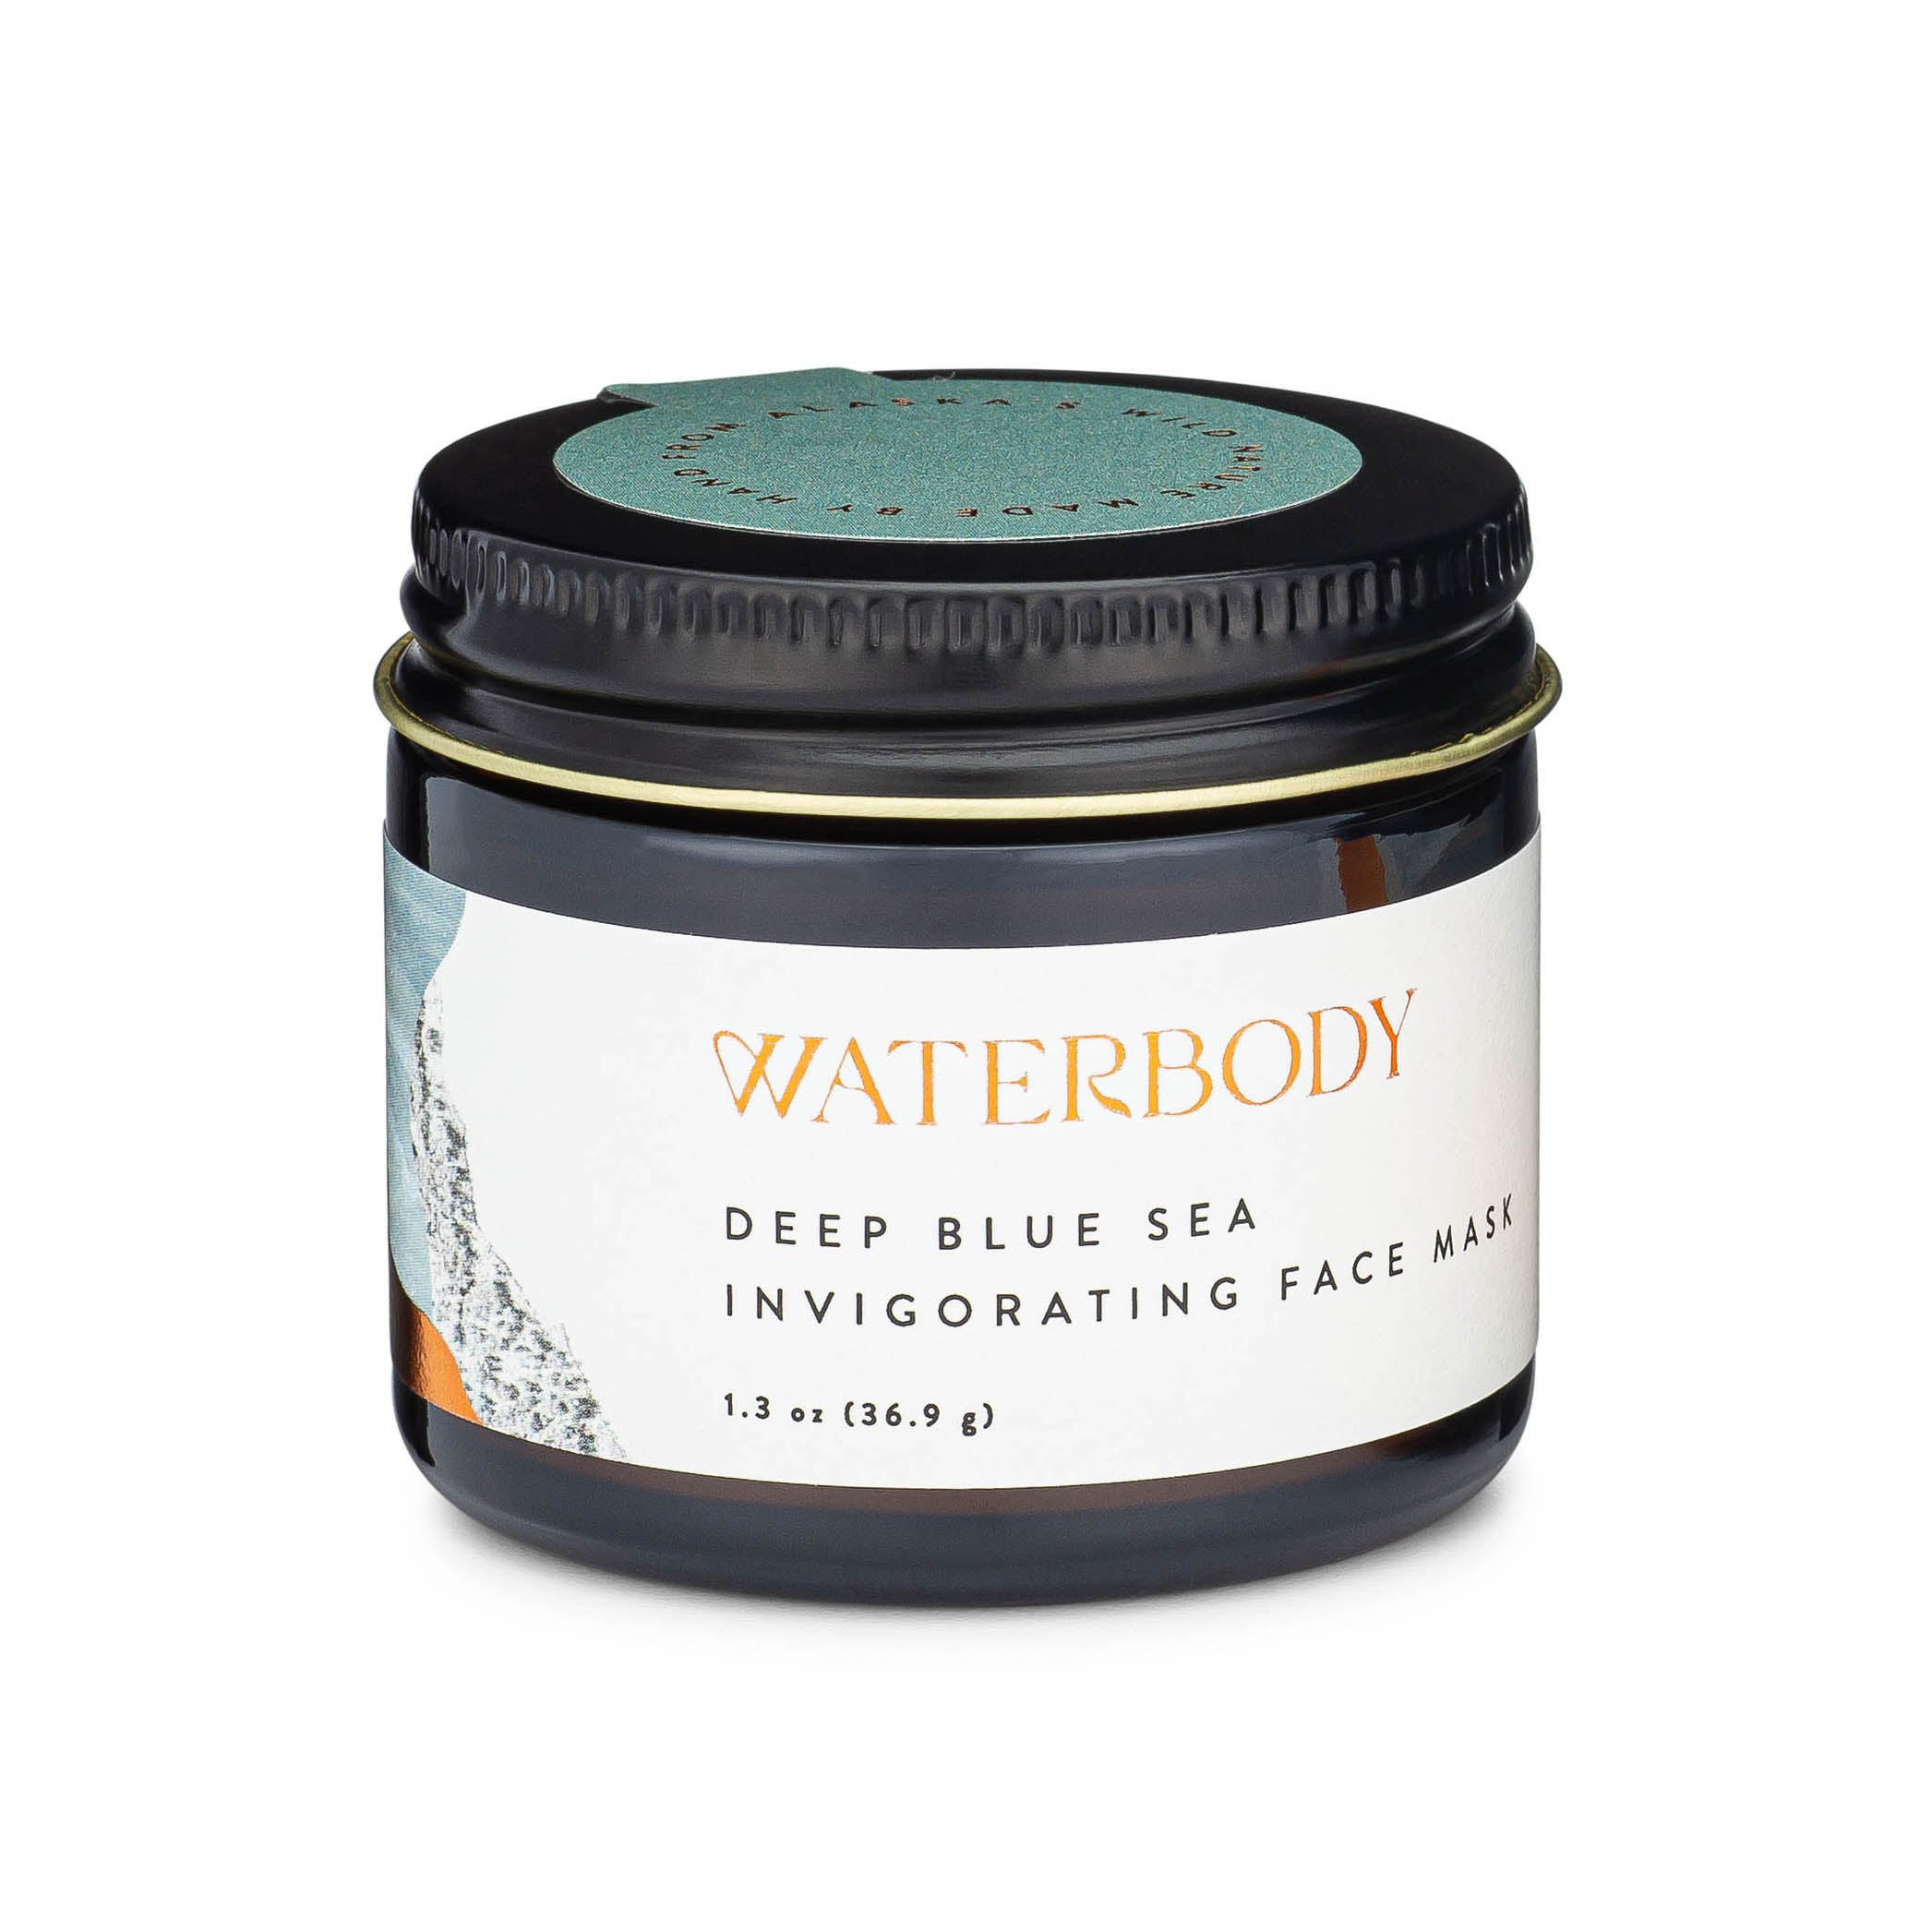 A brown glass jar with a black tin lid has a white label with gold foil text displaying Waterbody Deep Blue Sea Invigorating Face Mask